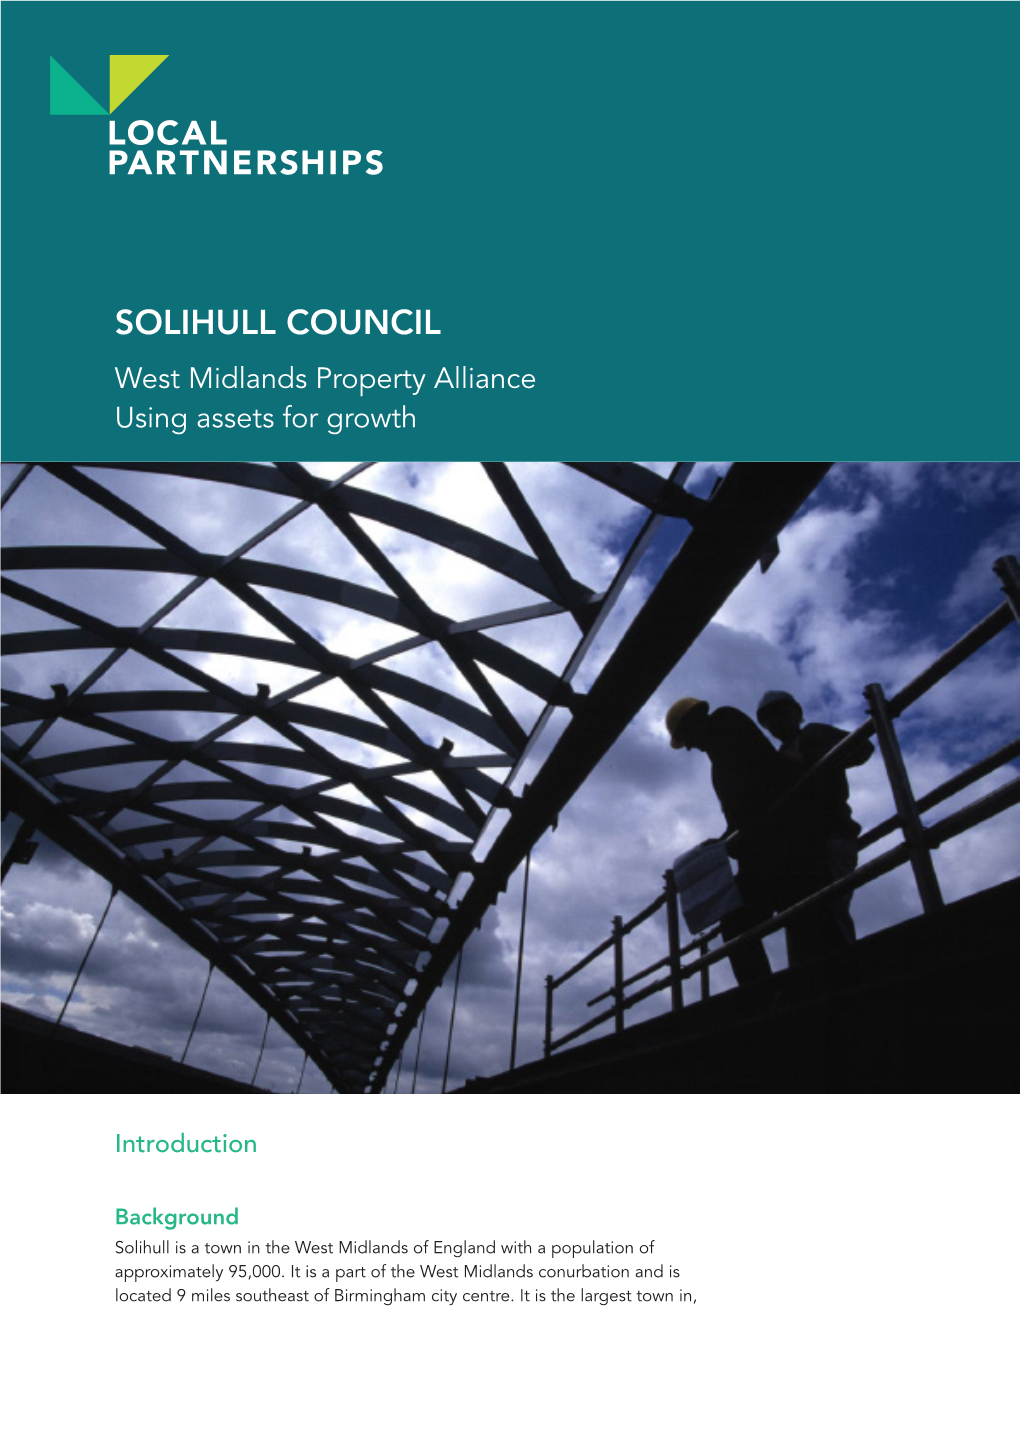 SOLIHULL COUNCIL West Midlands Property Alliance Using Assets for Growth